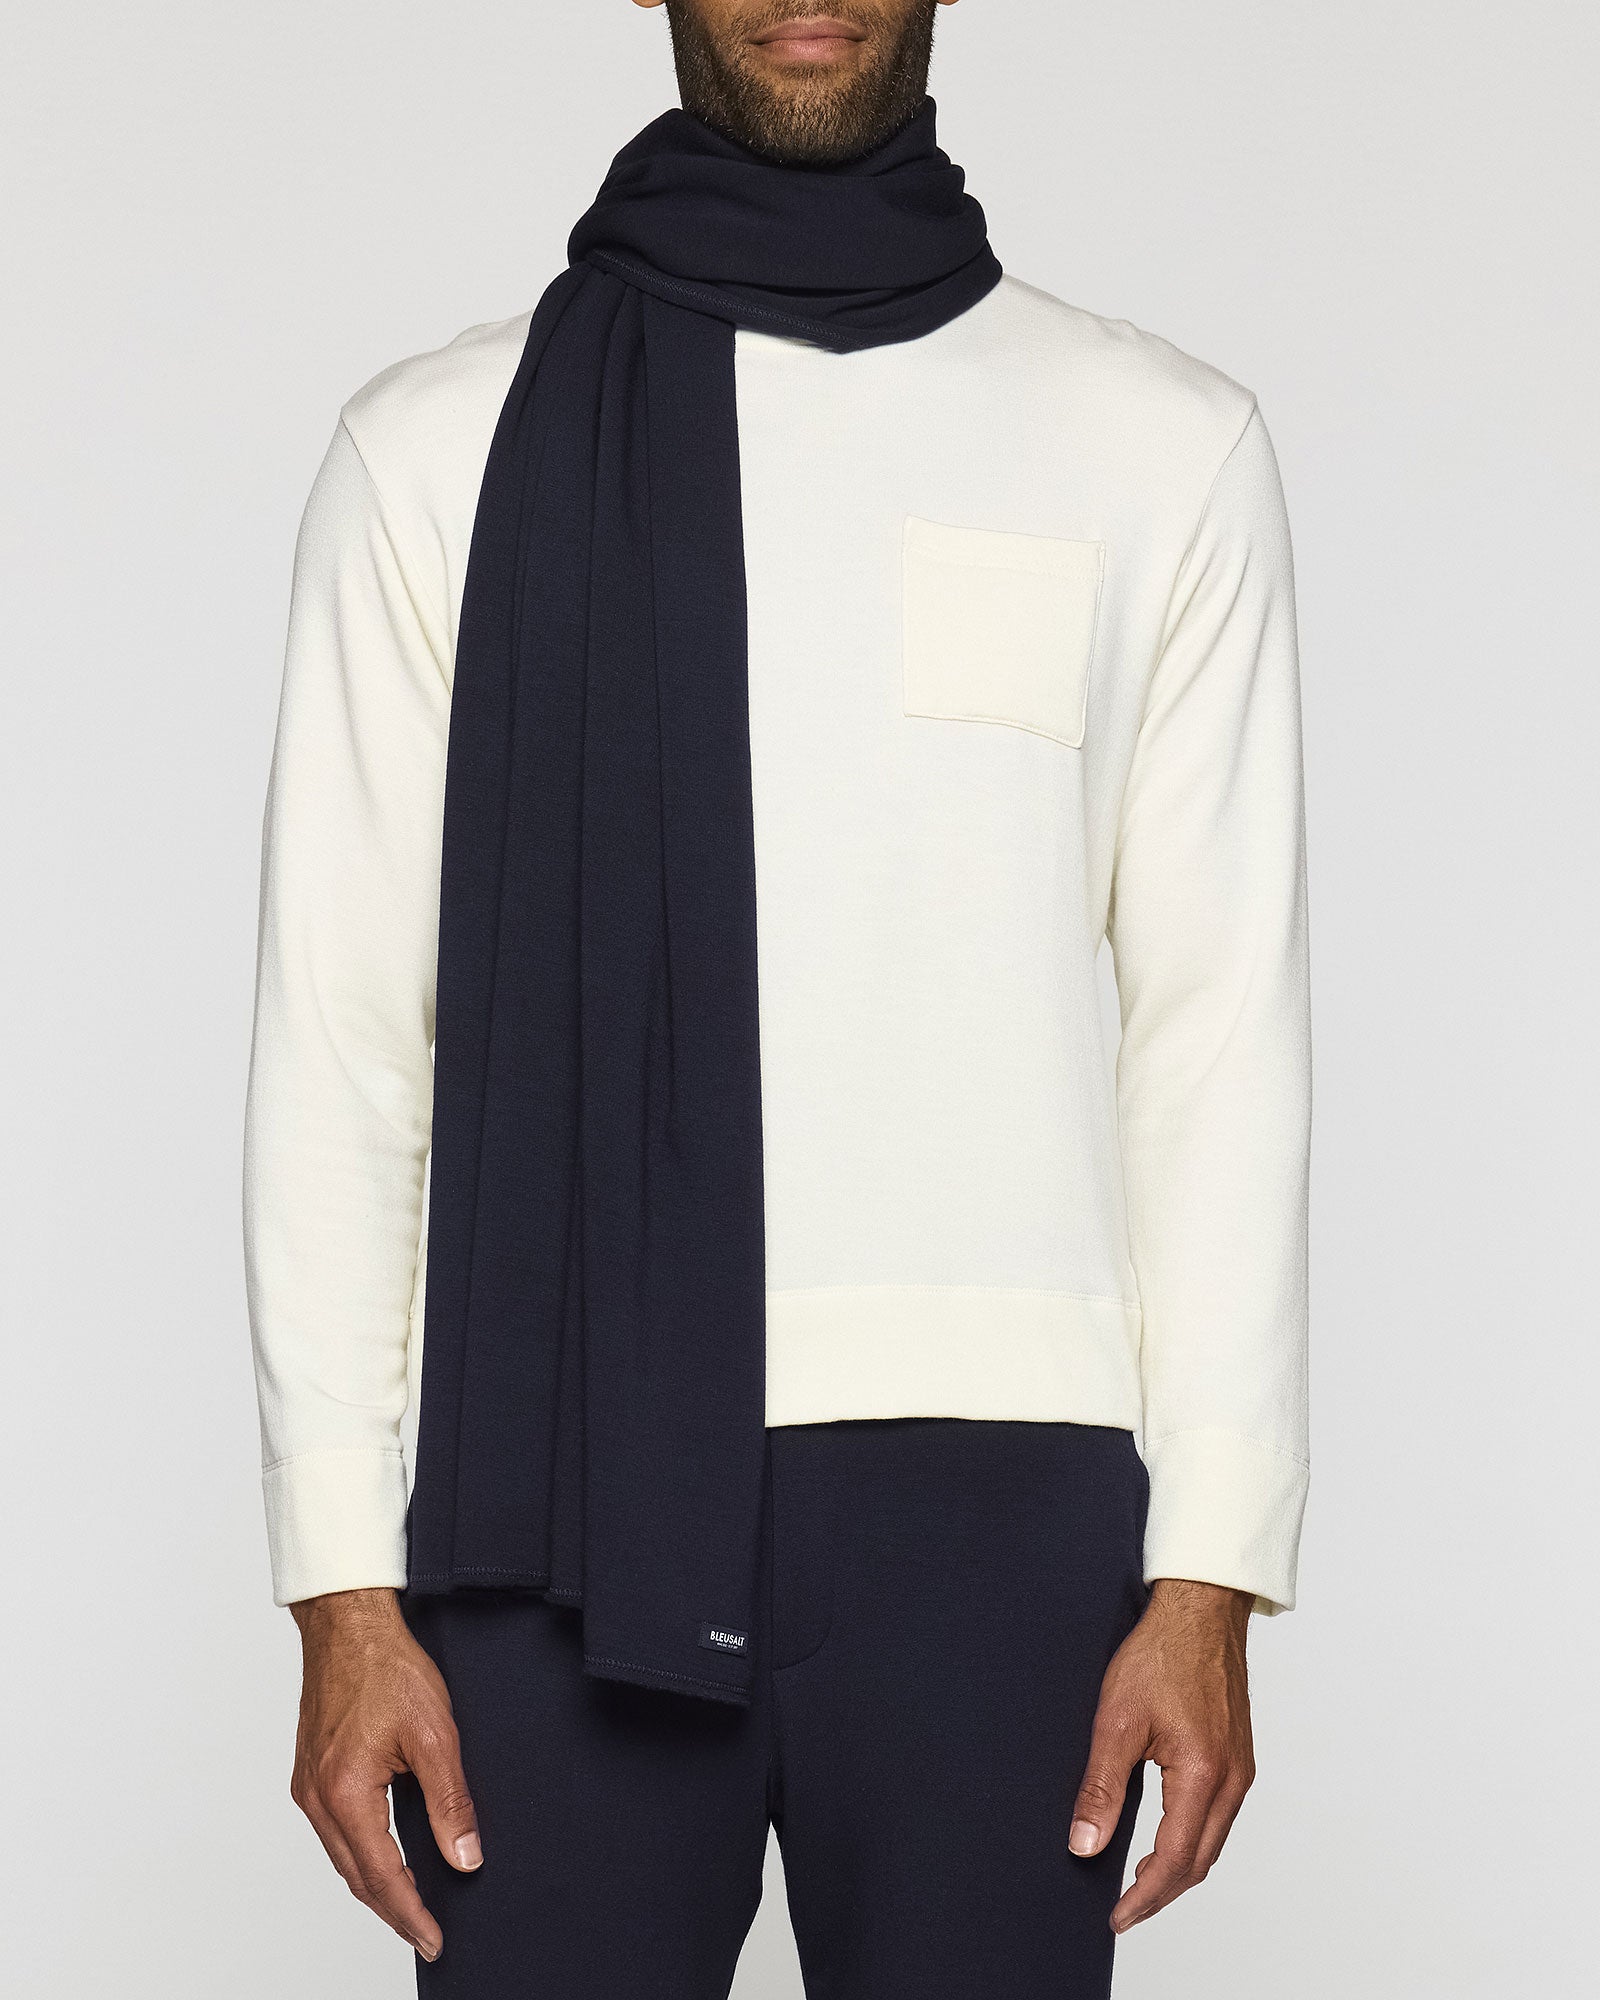 Scarf by Bleusalt - Navy Color - Lightweight & Breathable - Sustainable Luxury Material from Soft Fabric - Washable